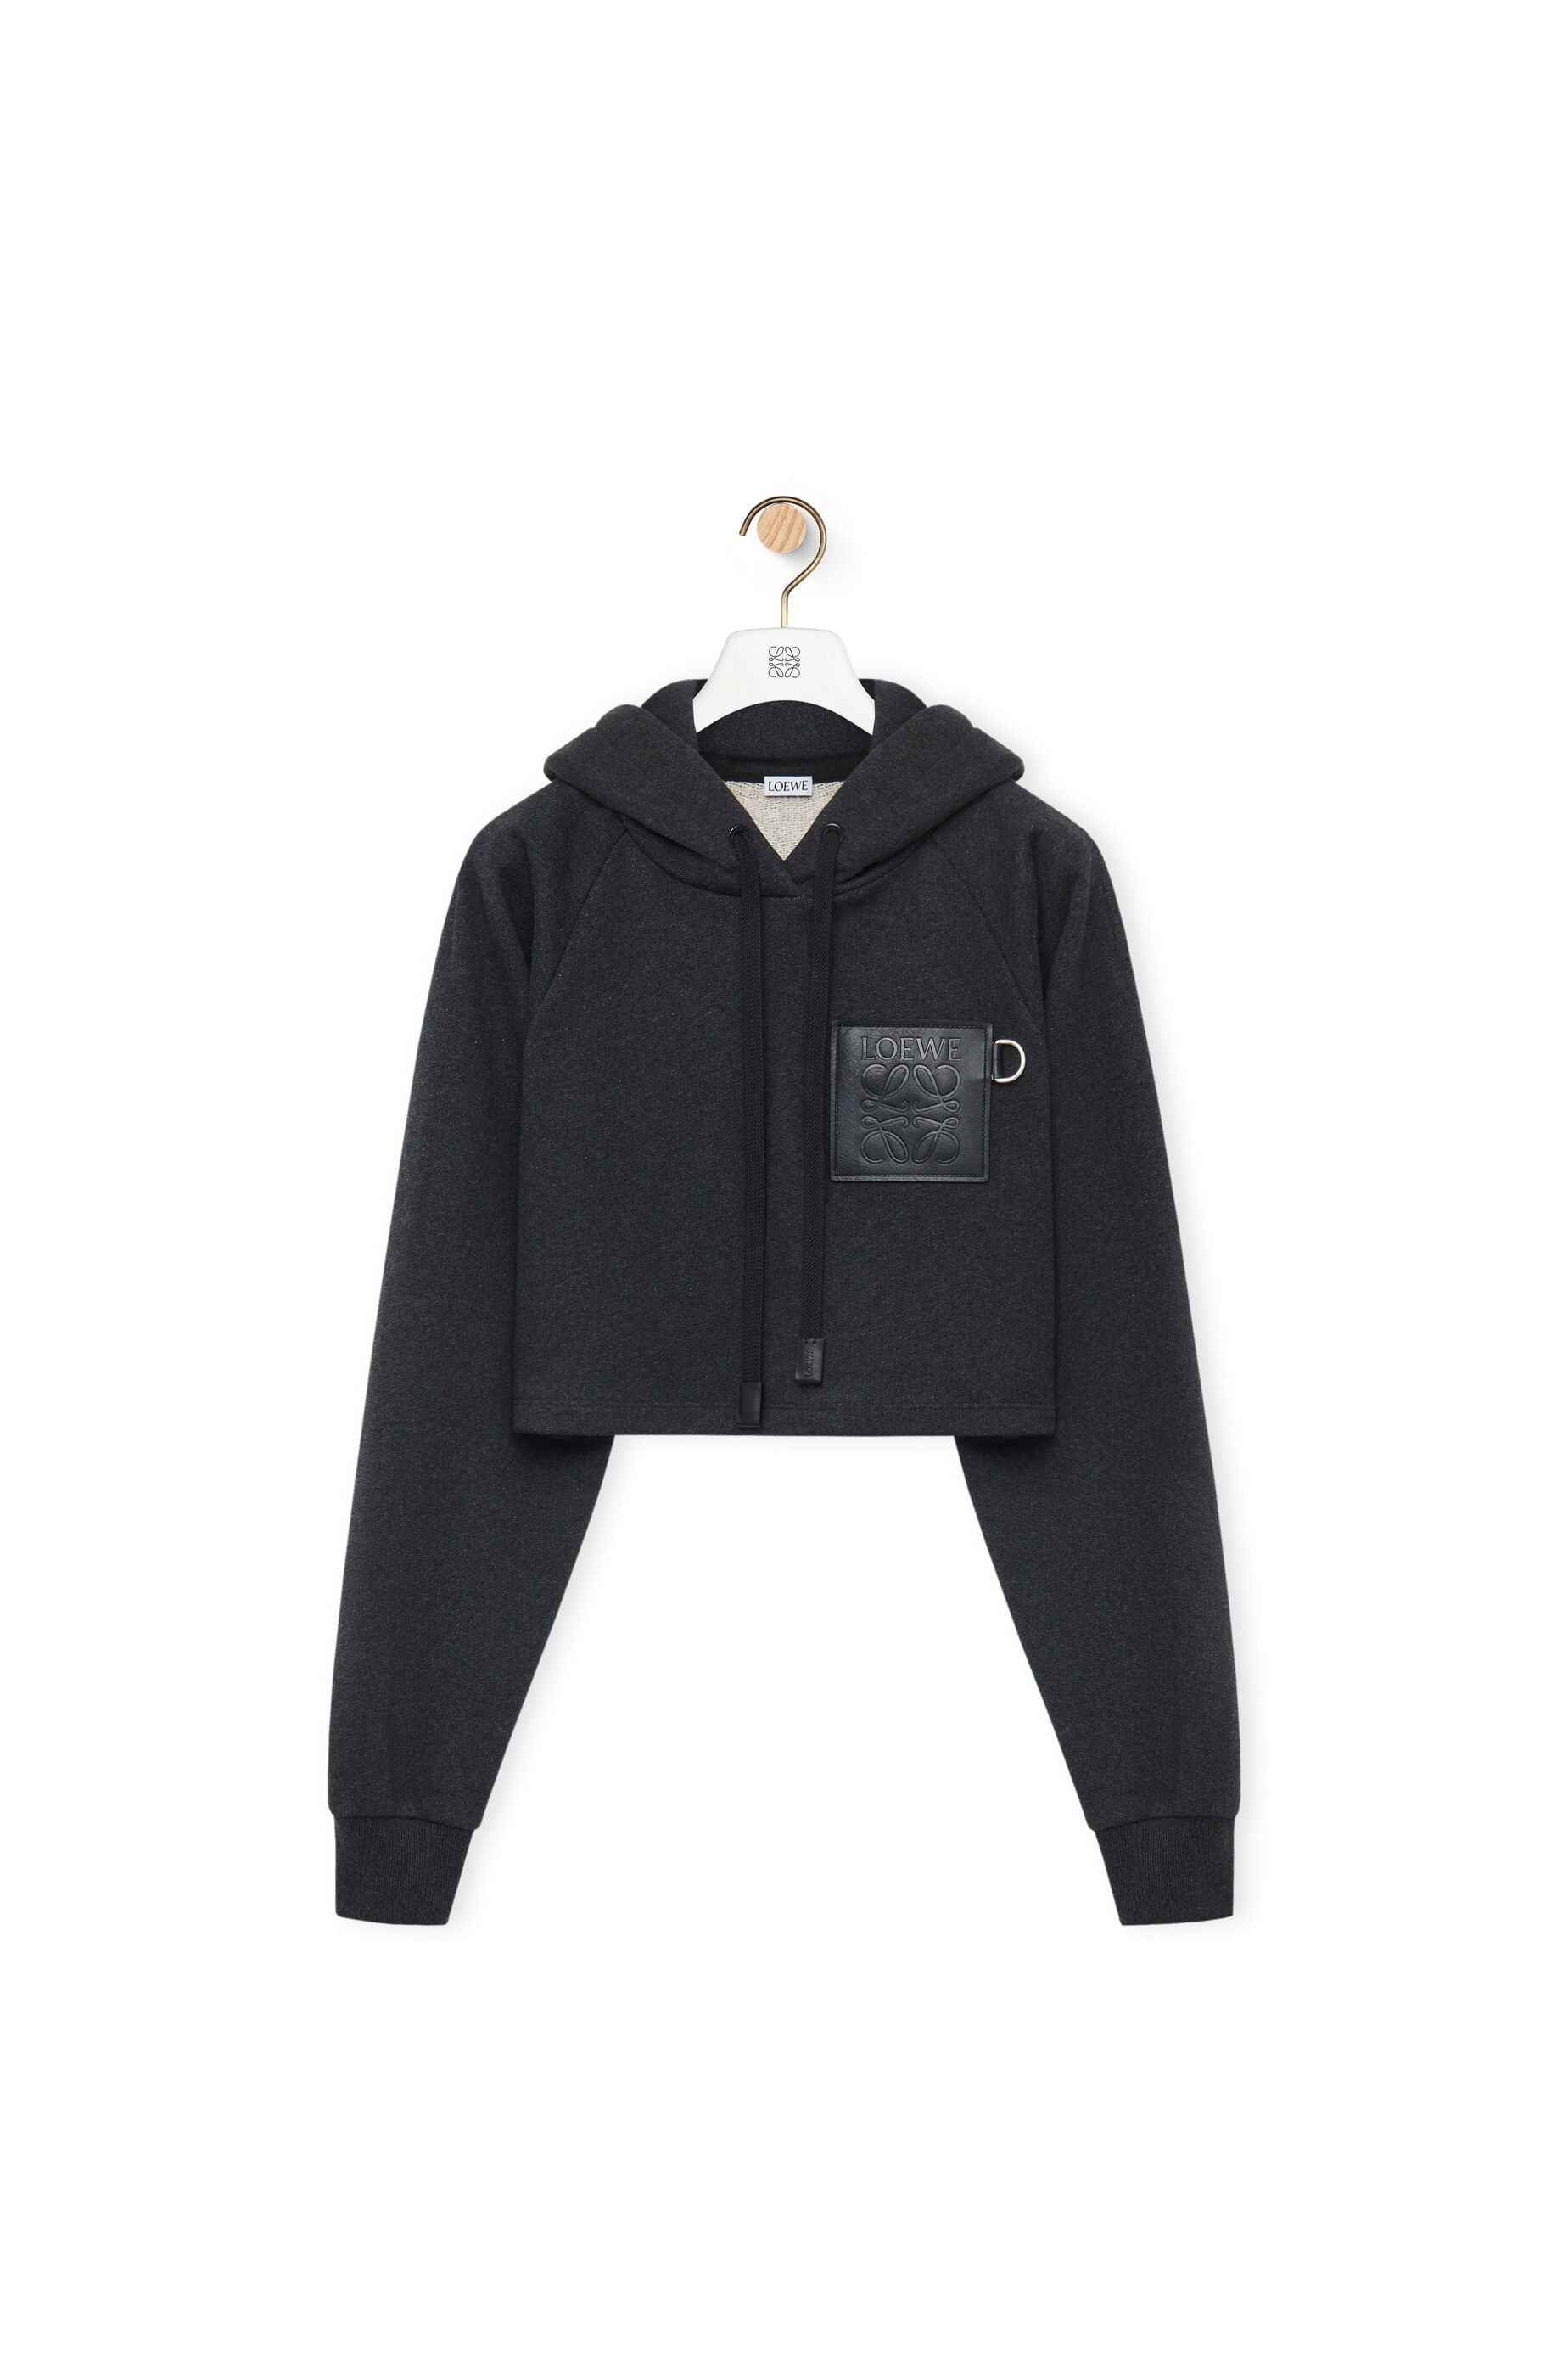 Loewe - logo-patch Cropped Cotton-Blend Jersey Hoodie - Womens - Charcoal